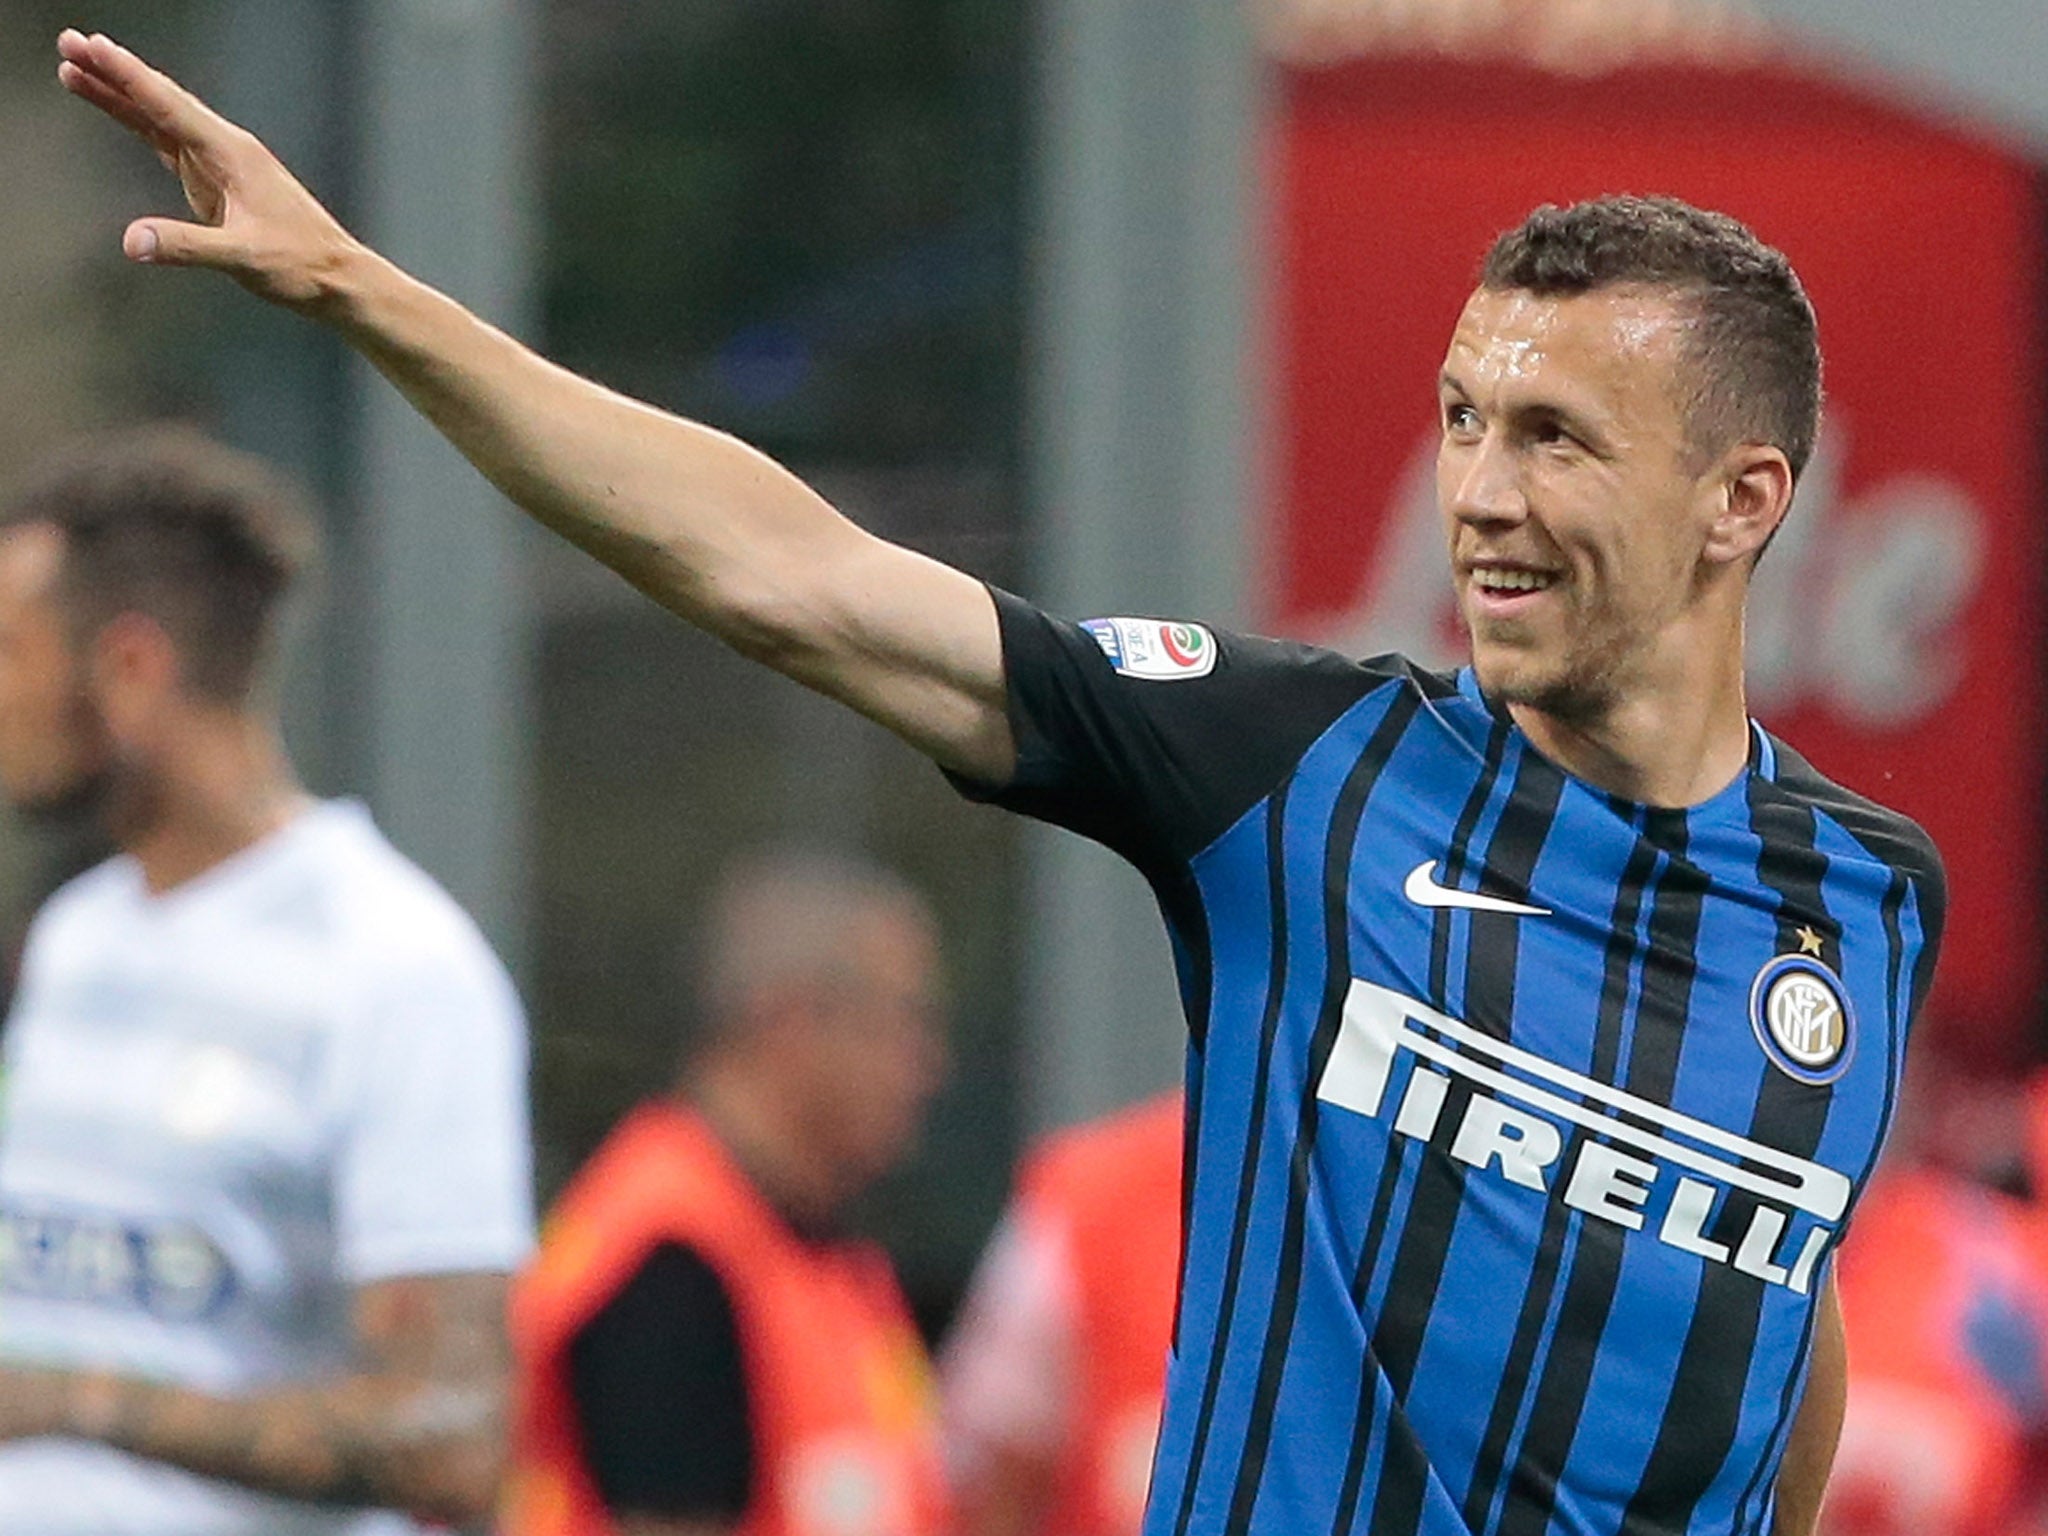 Perisic fits the profile of what Mourinho is looking for